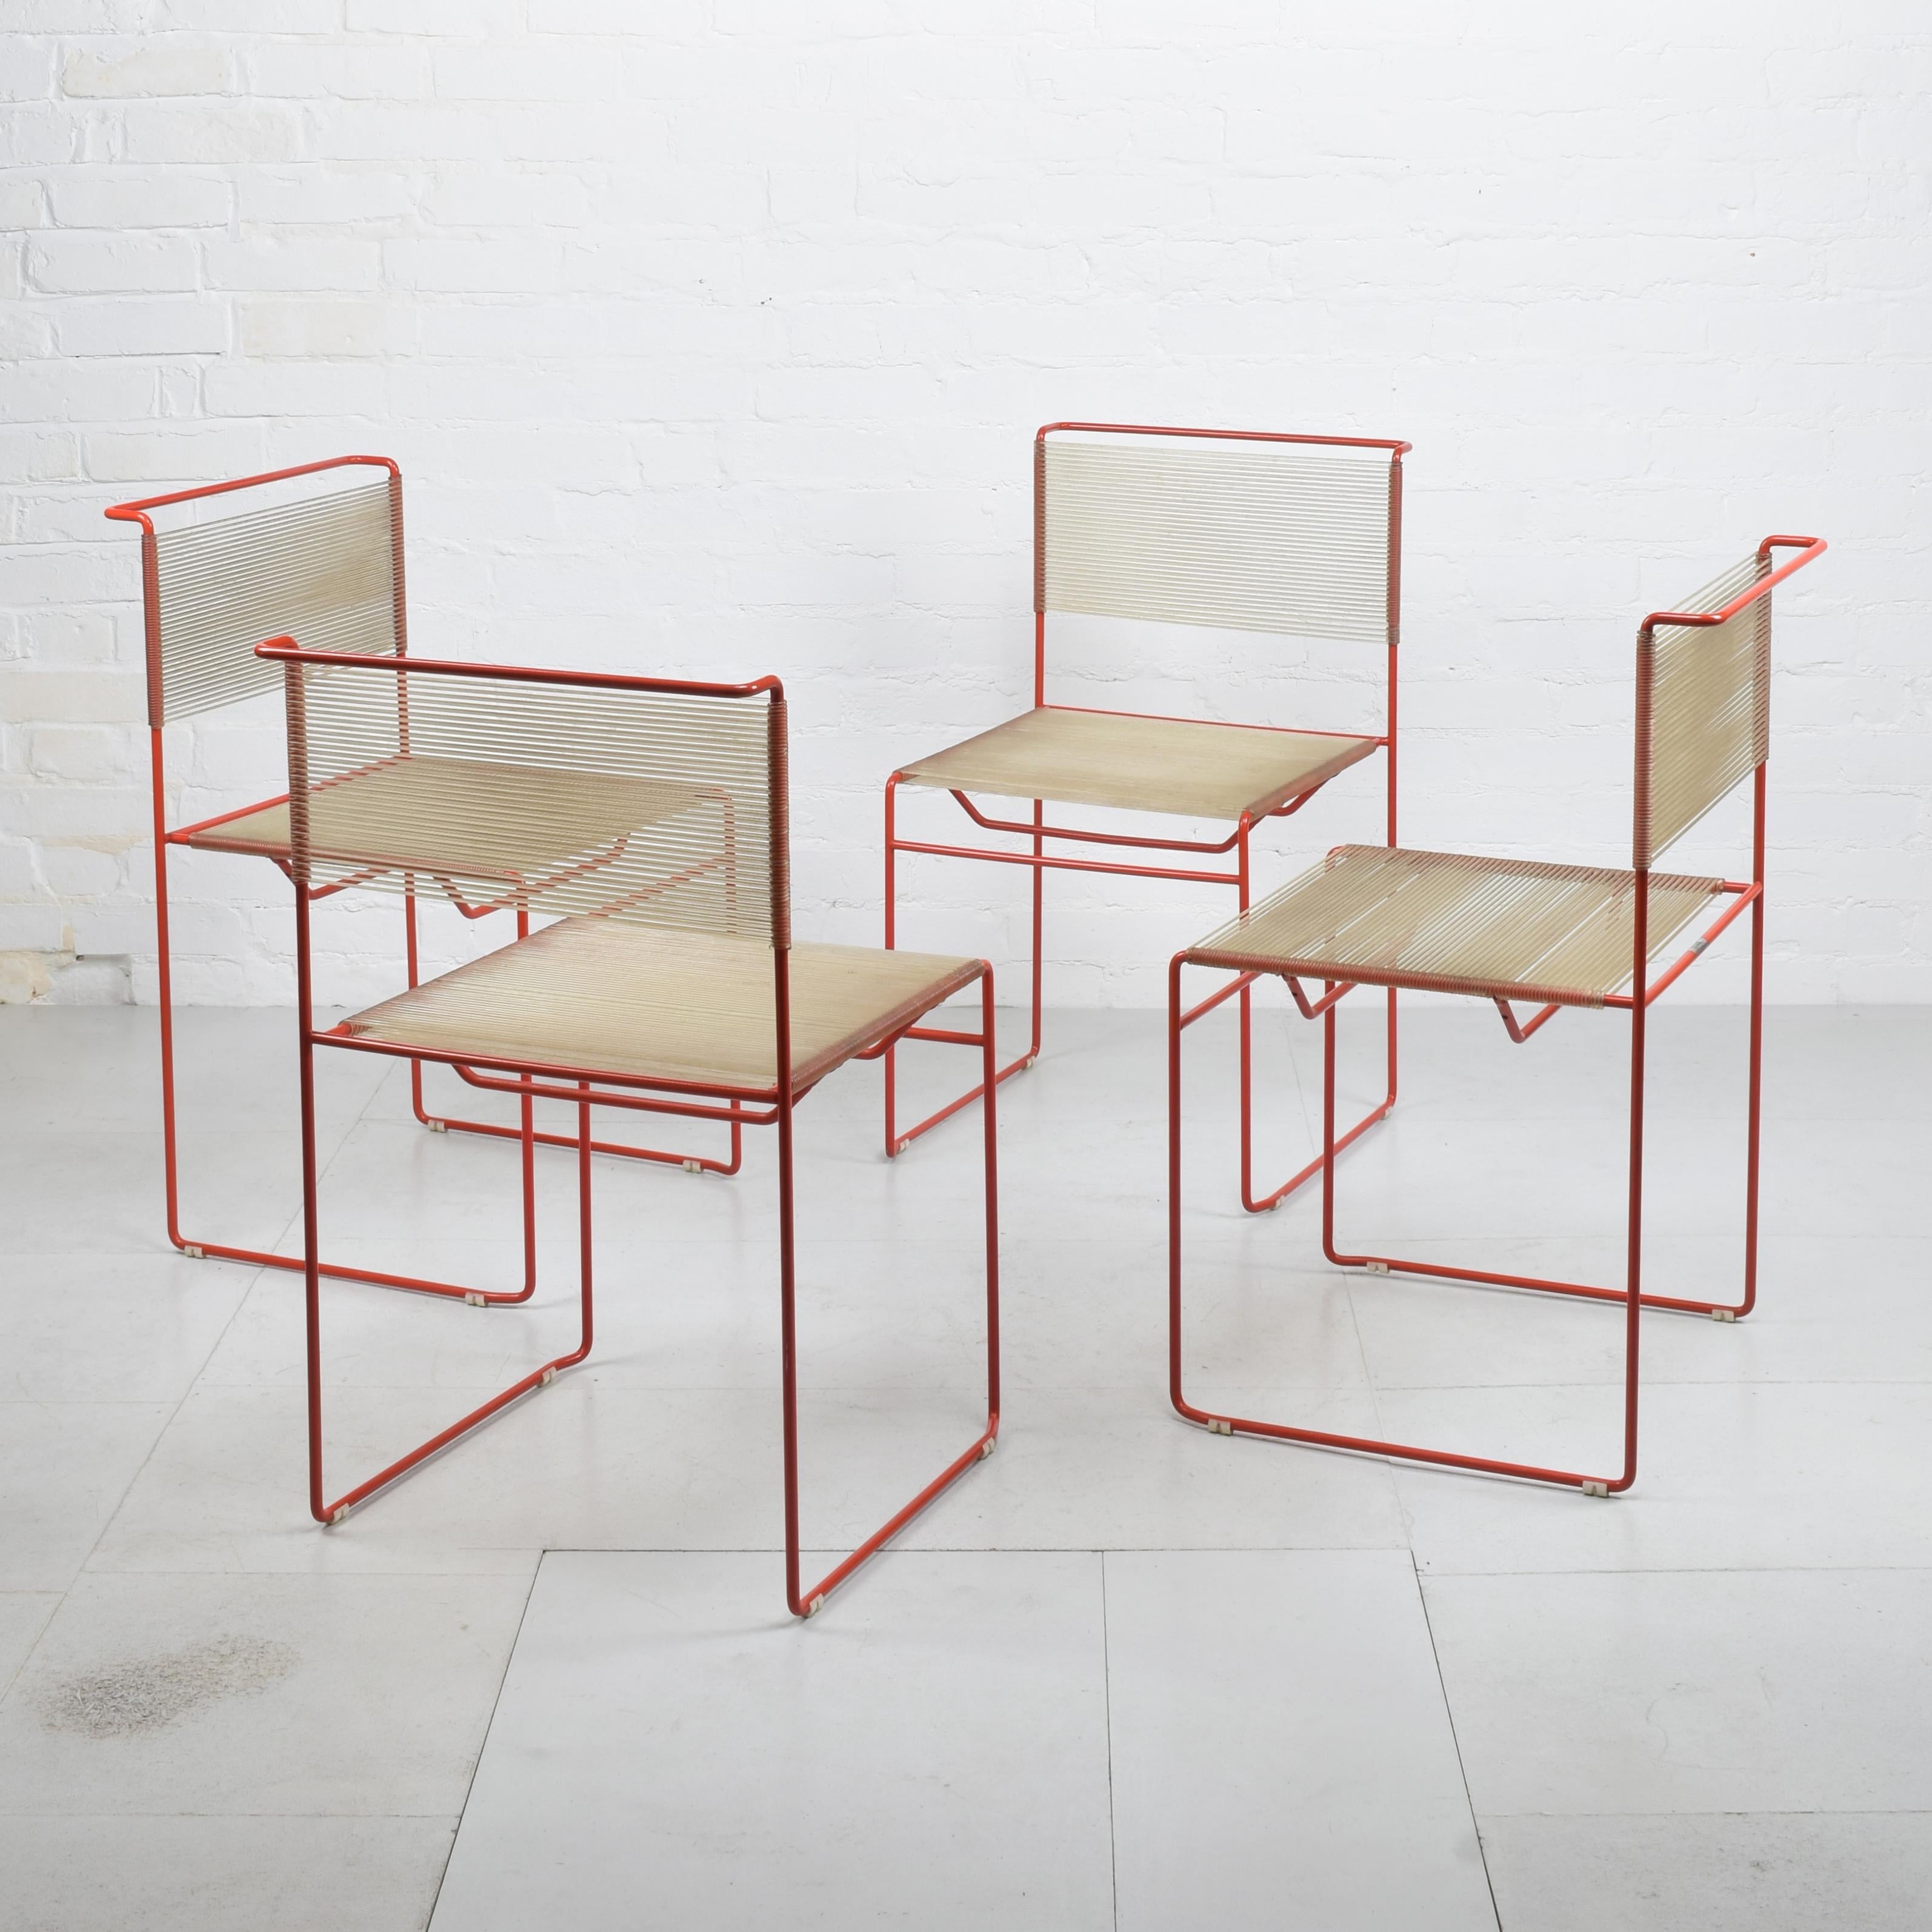 Giandomenico Belotti for CMP Padova, Italy c. 1970
‘Fly Line’ dining chairs, set of 4

Red metal frames with transparent tinted plastic cord seats and backs. Original plastic floor glides. Manufacturer’s labels to frames.

(please note: we also have